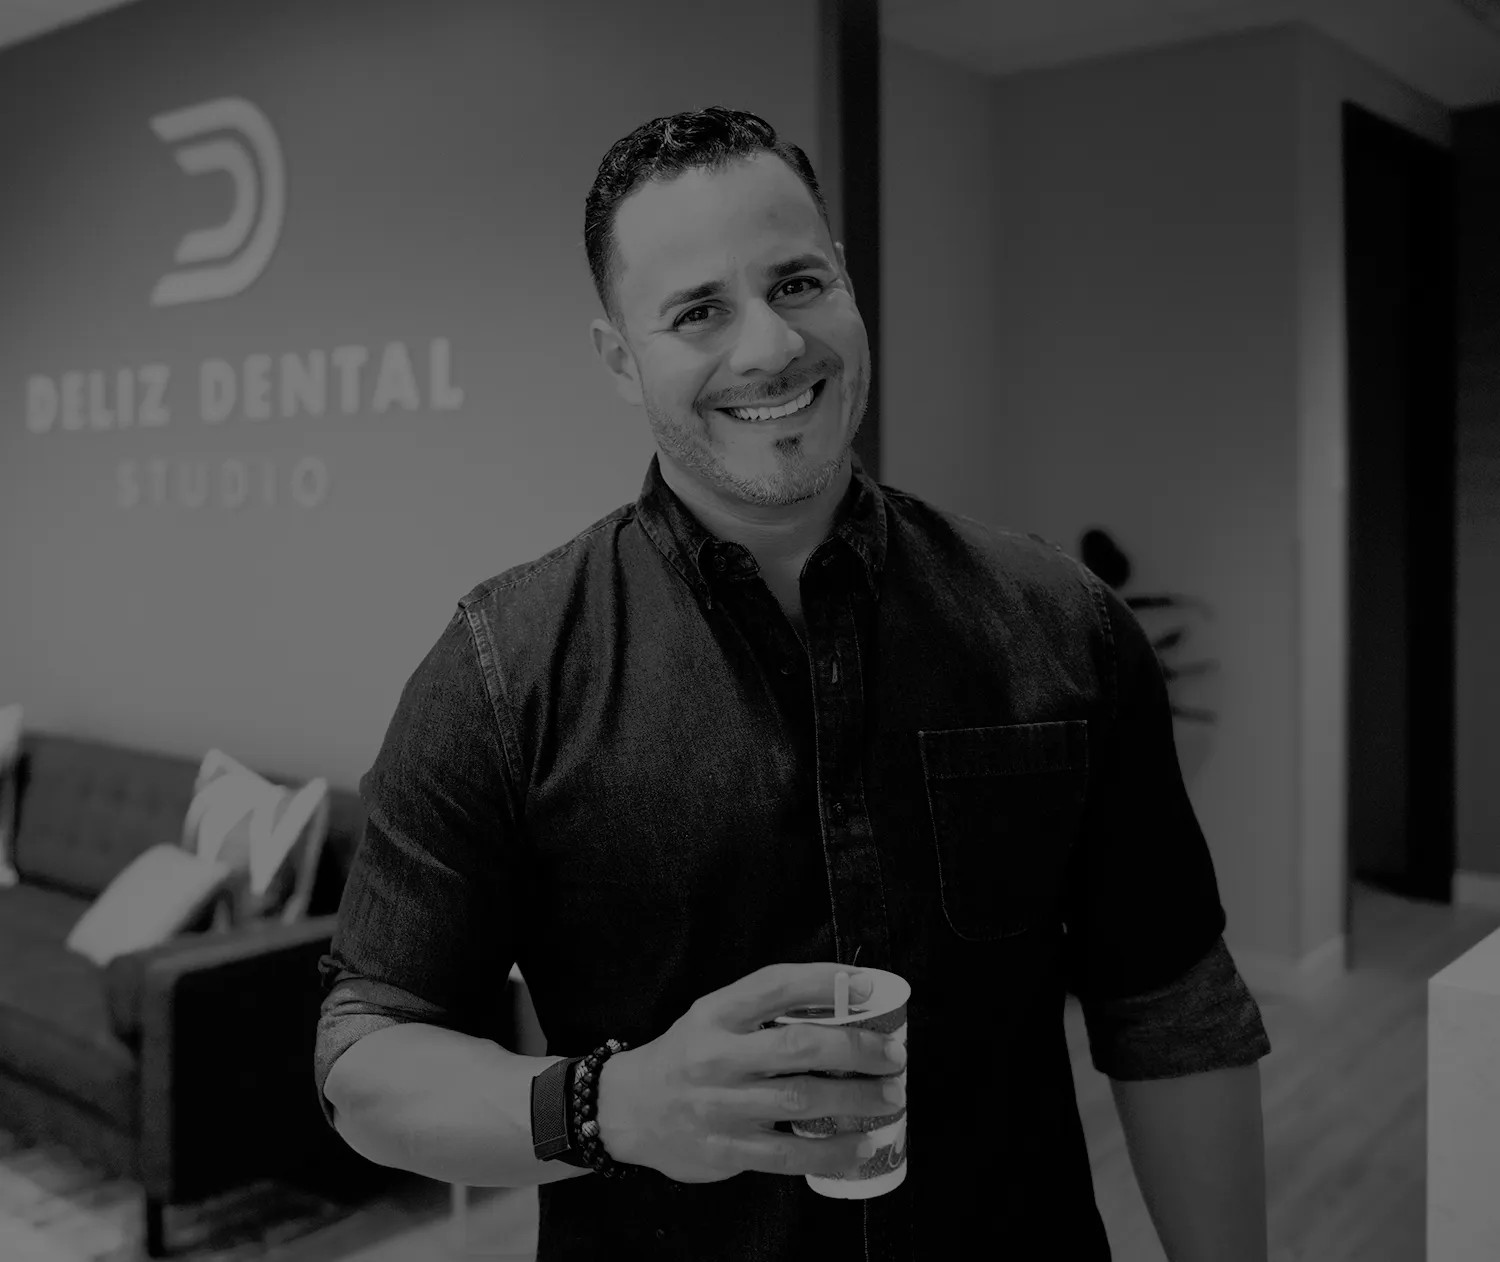 A smiling man holding a cup, standing in an office with the "Deliz Dental Studio" logo in the background, showcasing dental marketing. The image is in black and white.